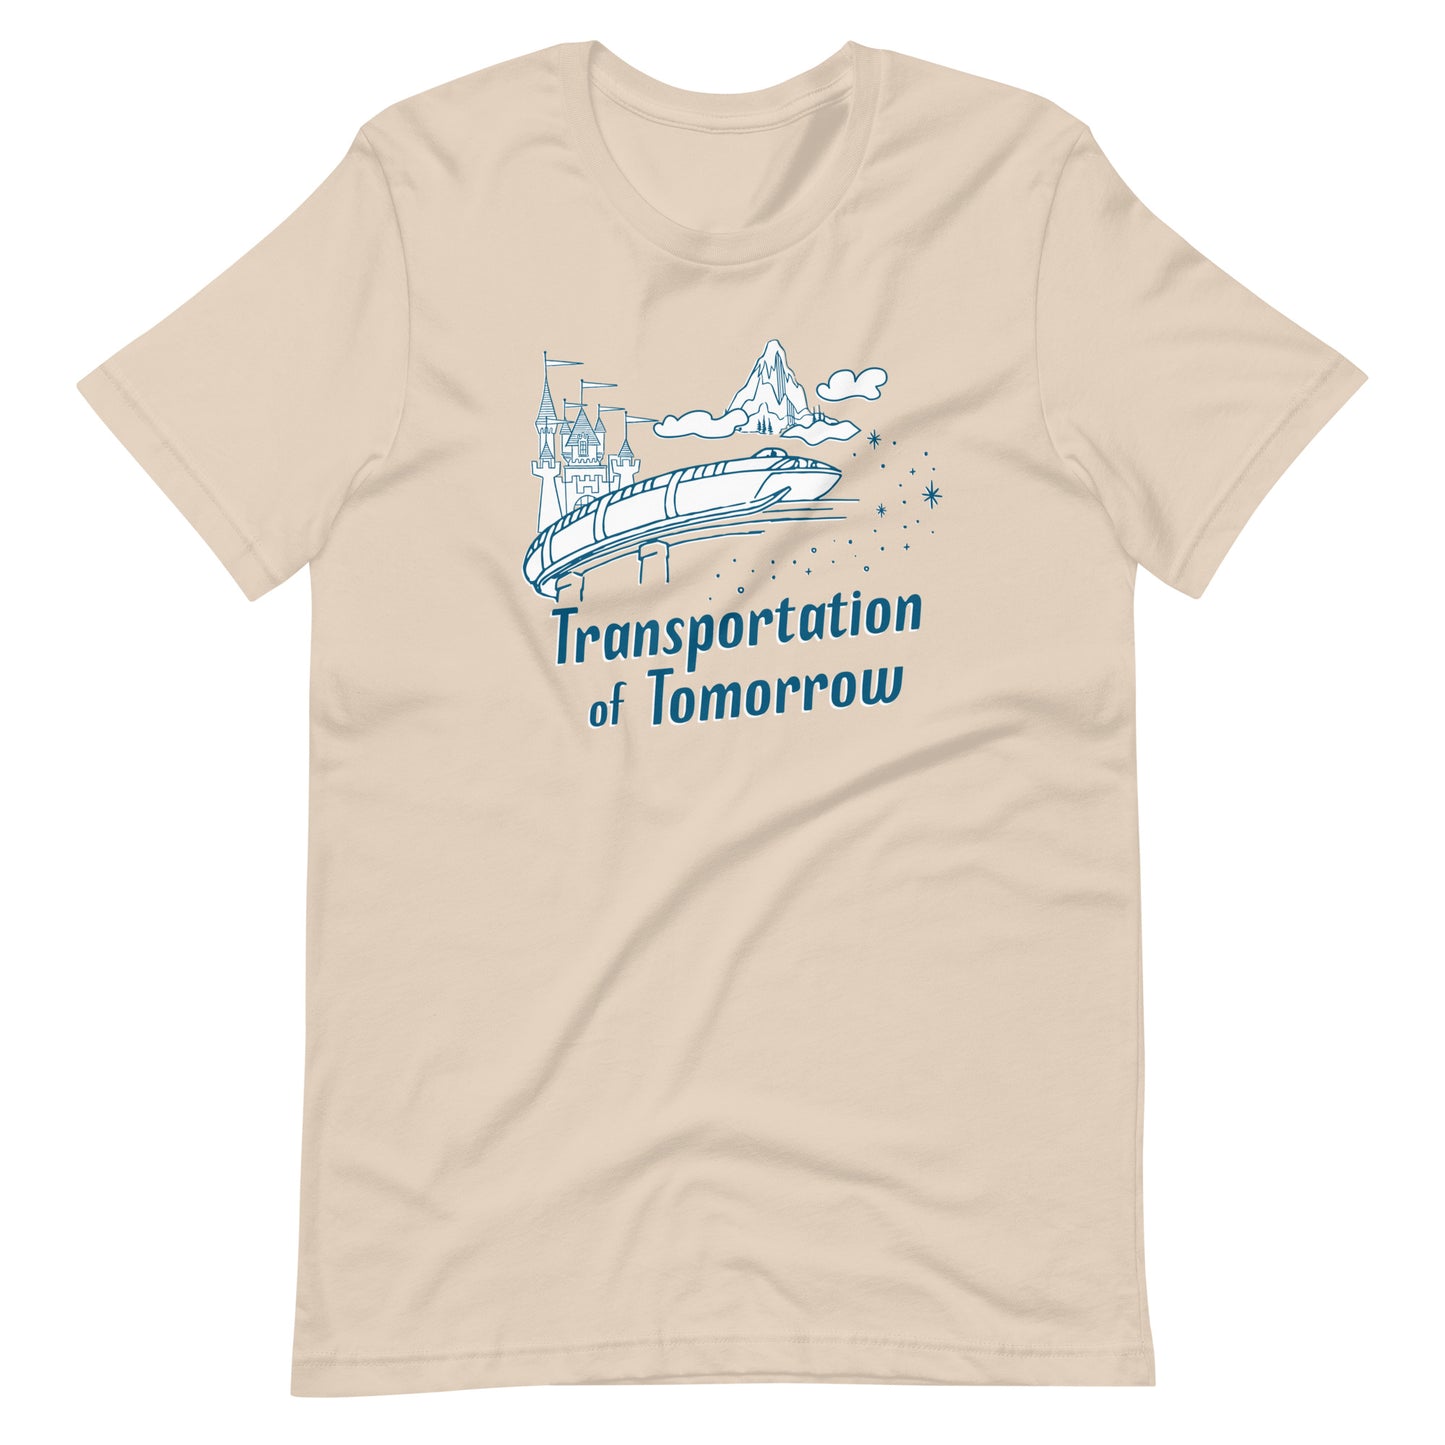 Cream shirt printed with vintage style sketch of the Matterhorn, Castle, and Monorail with pixie dust. The shirt says Transportation of Tomorrow.